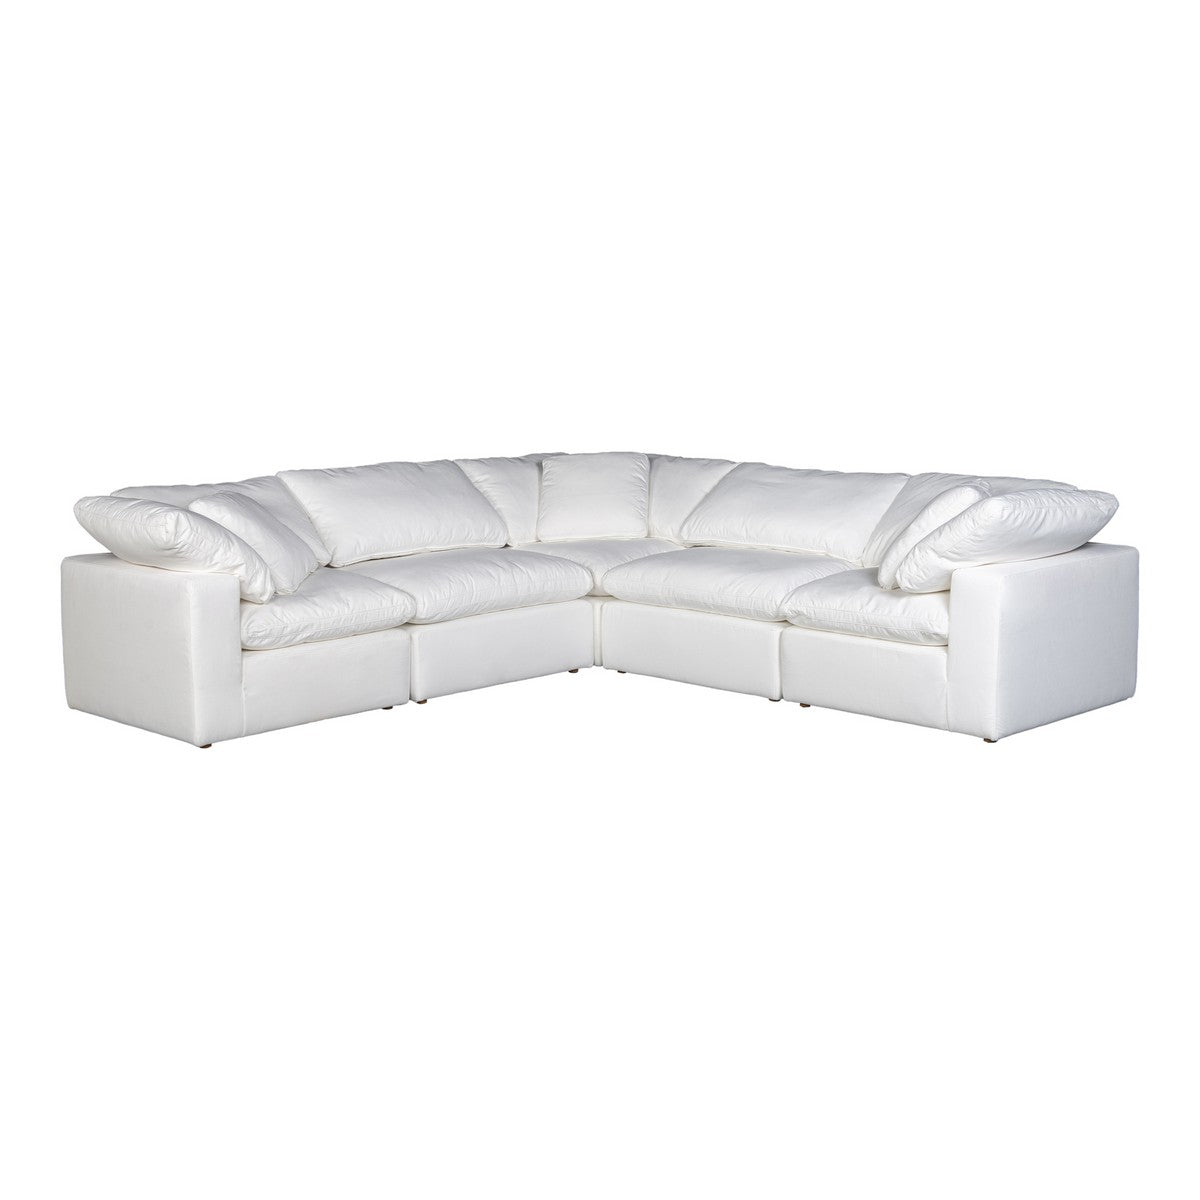 Moe's Home Collection Terra Condo Classic L Modular Sectional Livesmart Fabric Cream - YJ-1017-05 - Moe's Home Collection - Extras - Minimal And Modern - 1